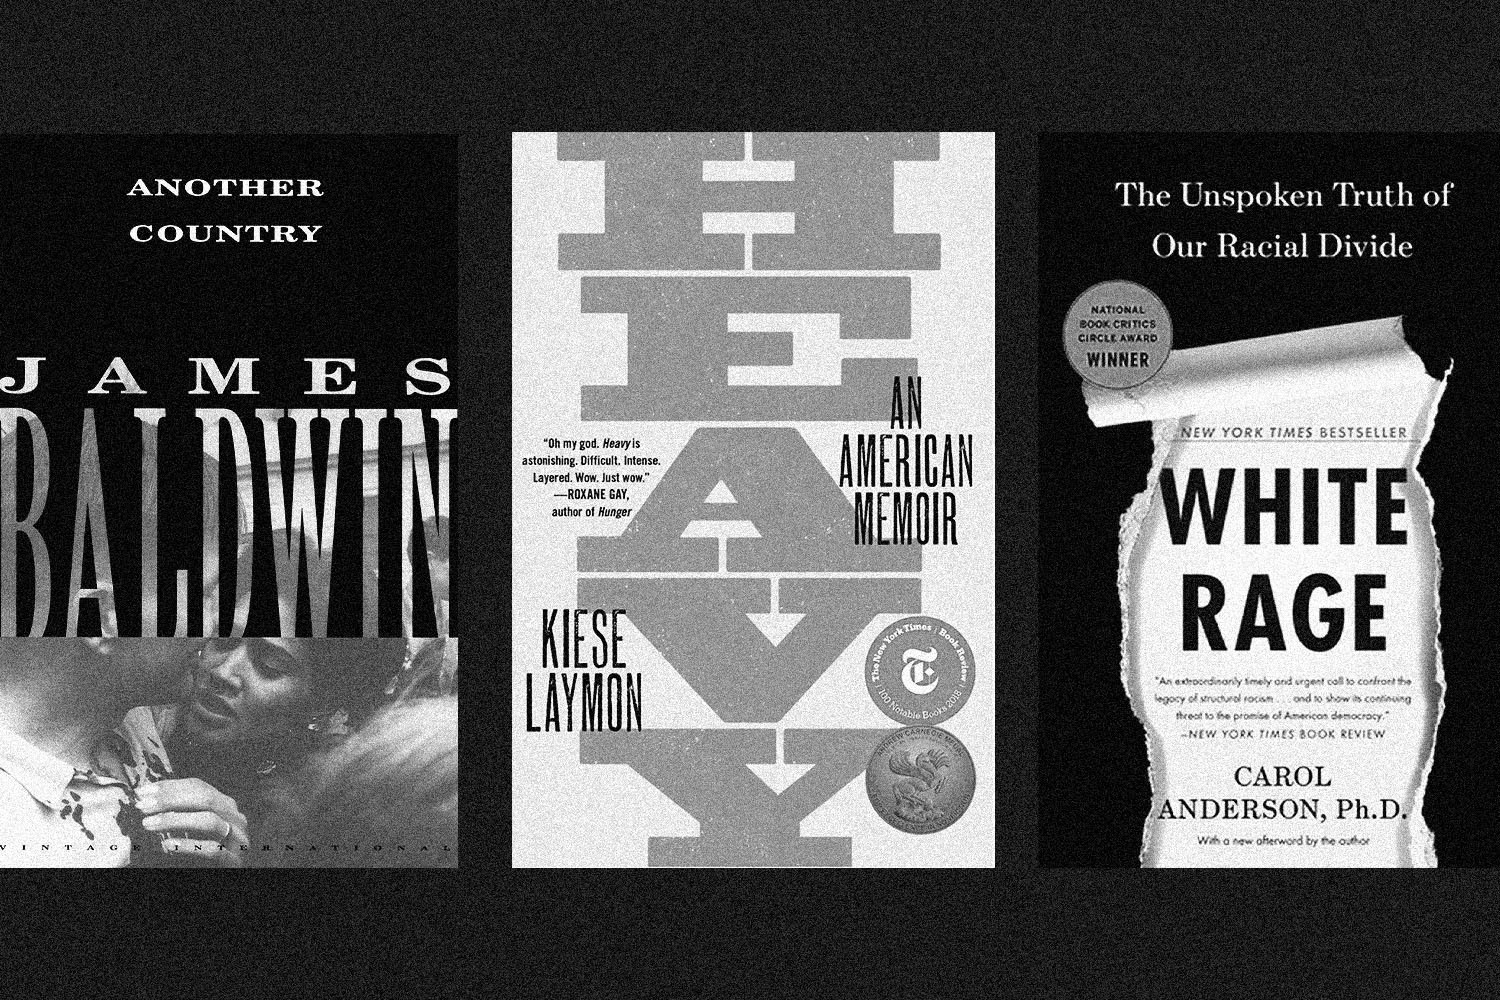 20 Books That Have Changed the Way We Think About Race in America